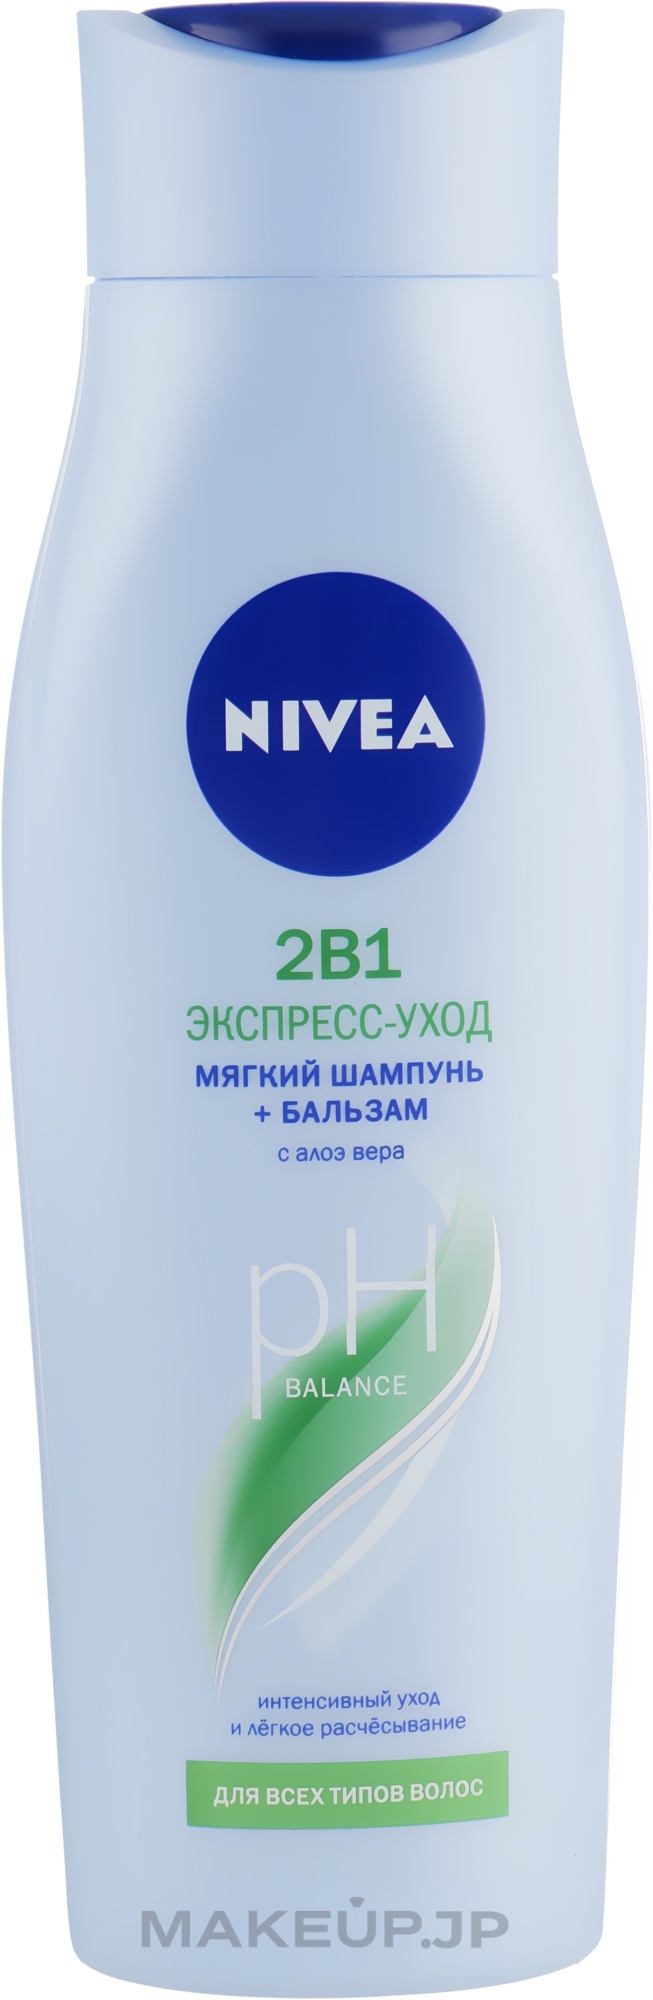 Shampoo-Conditioner 2in1 "Express-Care" - NIVEA Hair Care 2 in 1 Express Shampoo — photo 250 ml